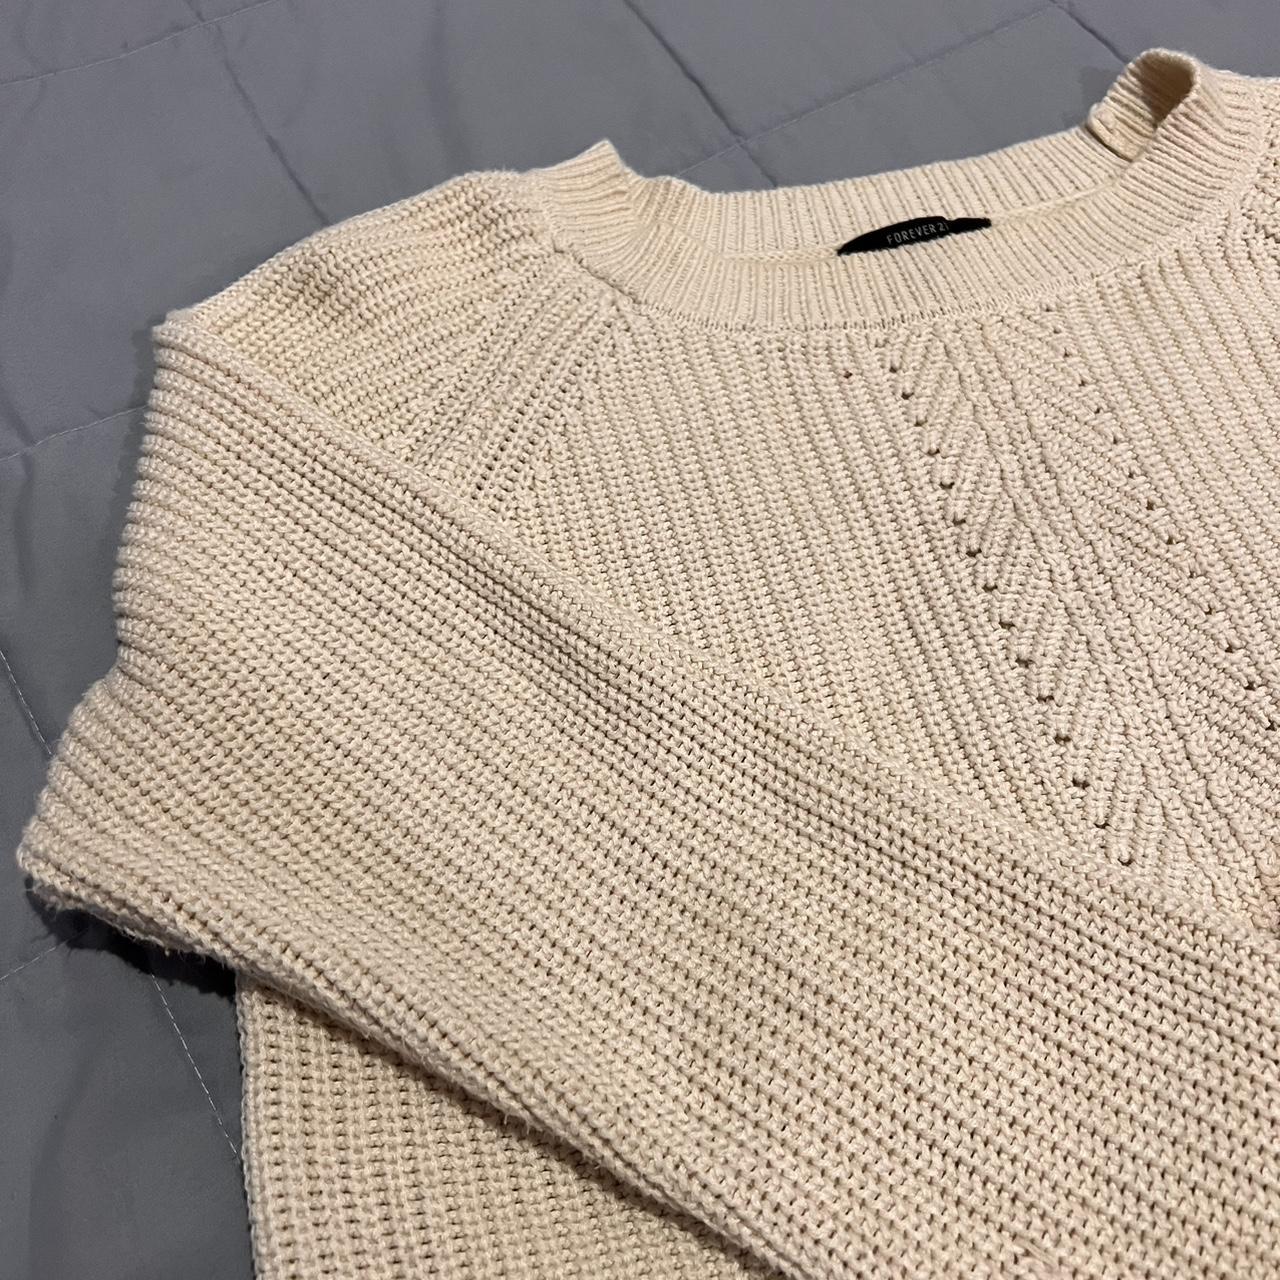 Rory Gilmore Fall Sweater — Vintage HQ, 55% OFF